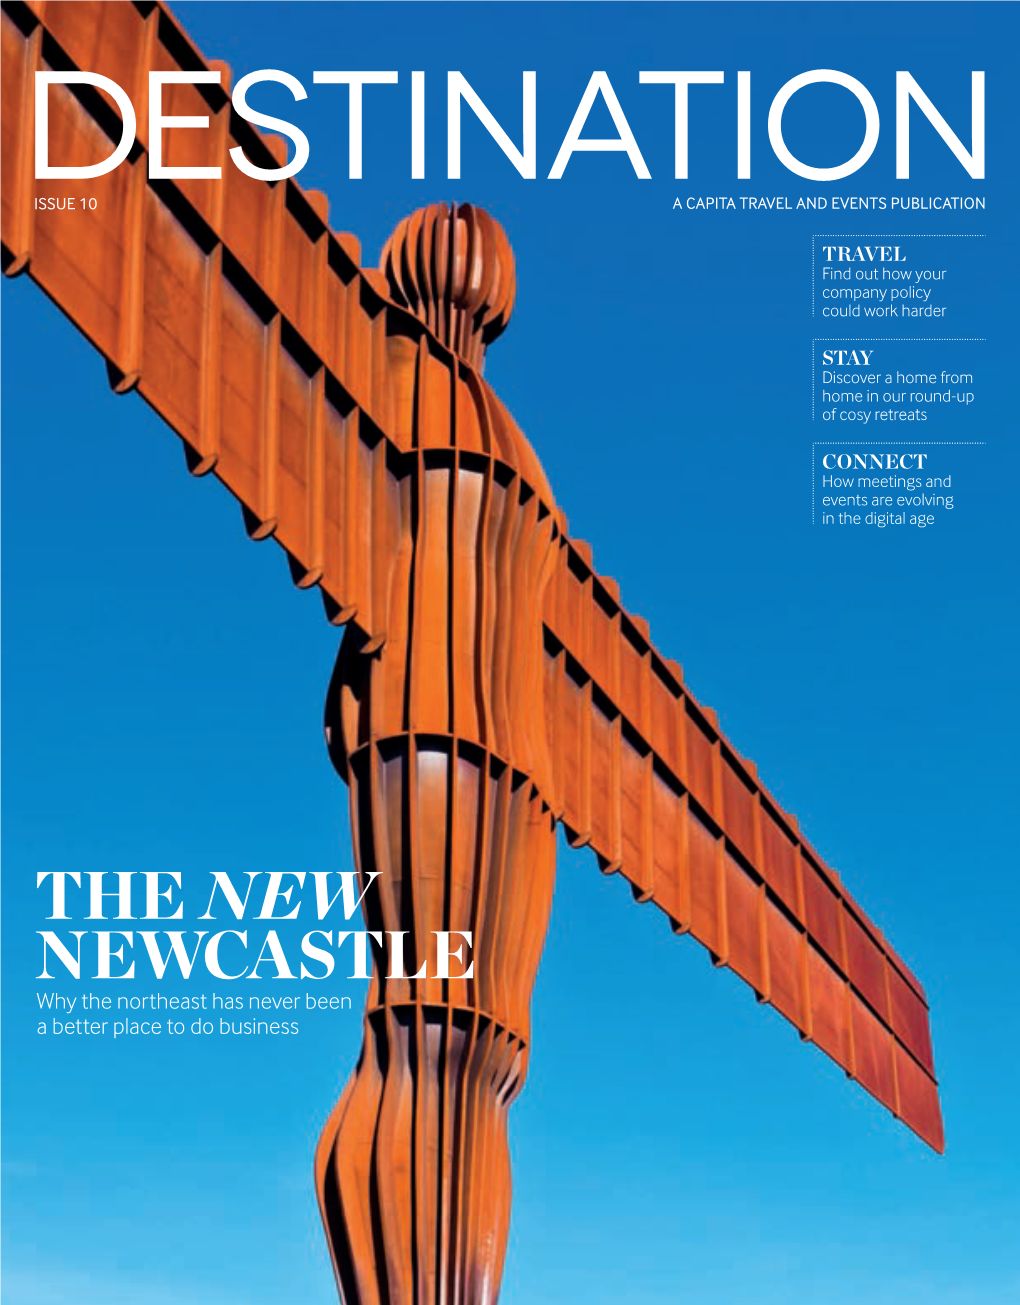 THE NEW NEWCASTLE Why the Northeast Has Never Been a Better Place to Do Business